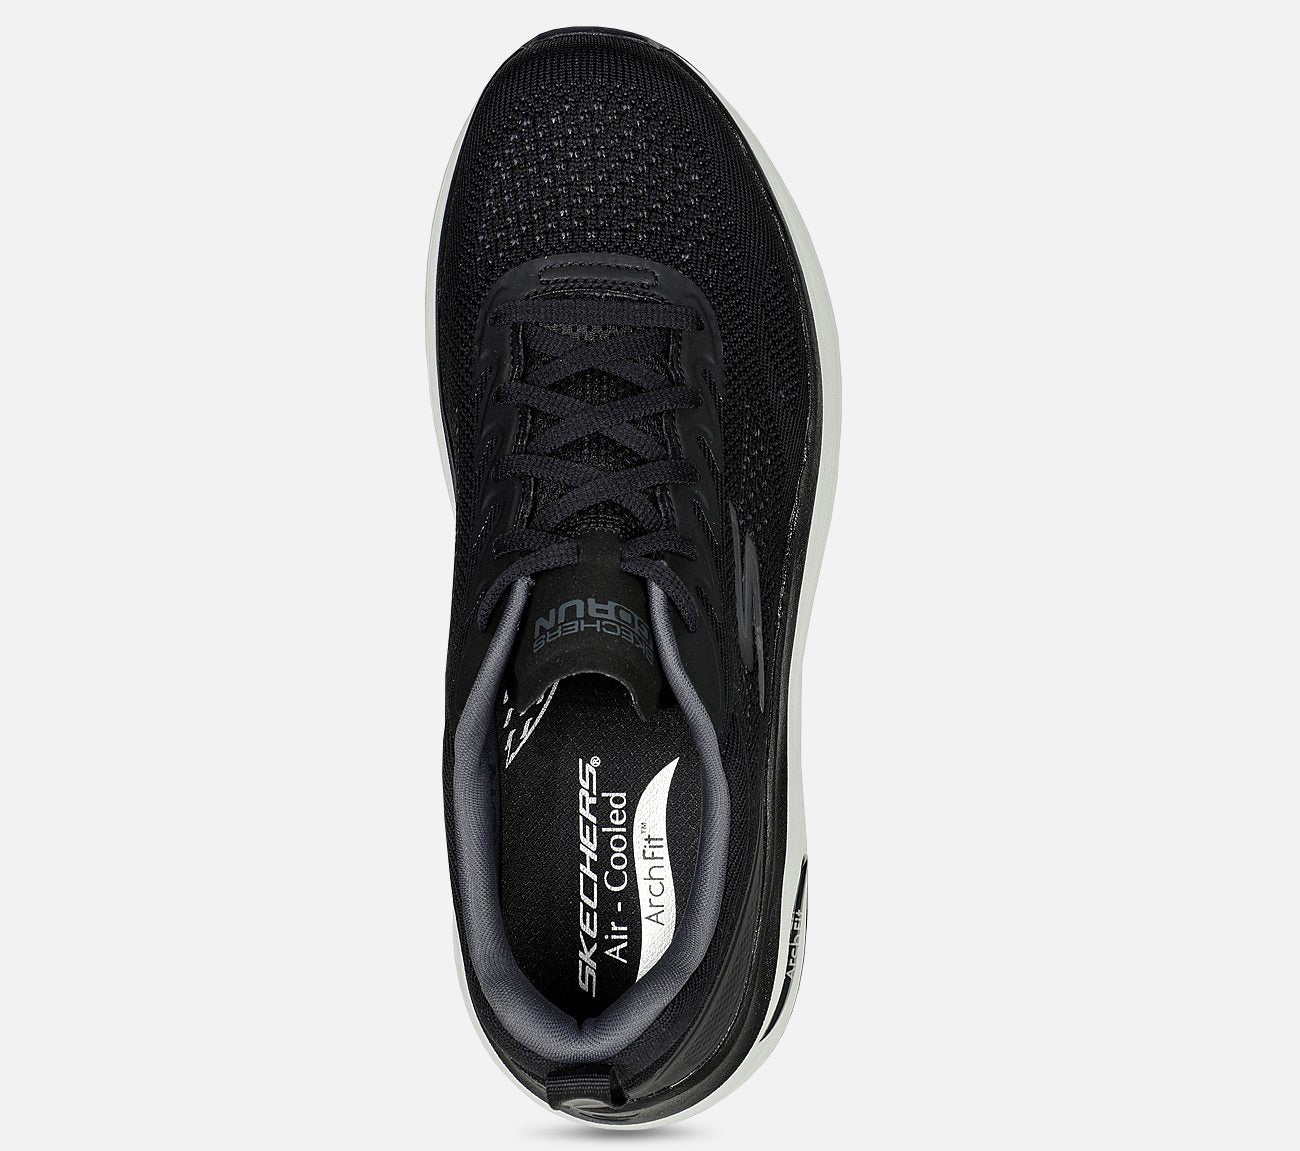 Max Cushioning Arch Fit - Upper Hand Shoe Skechers